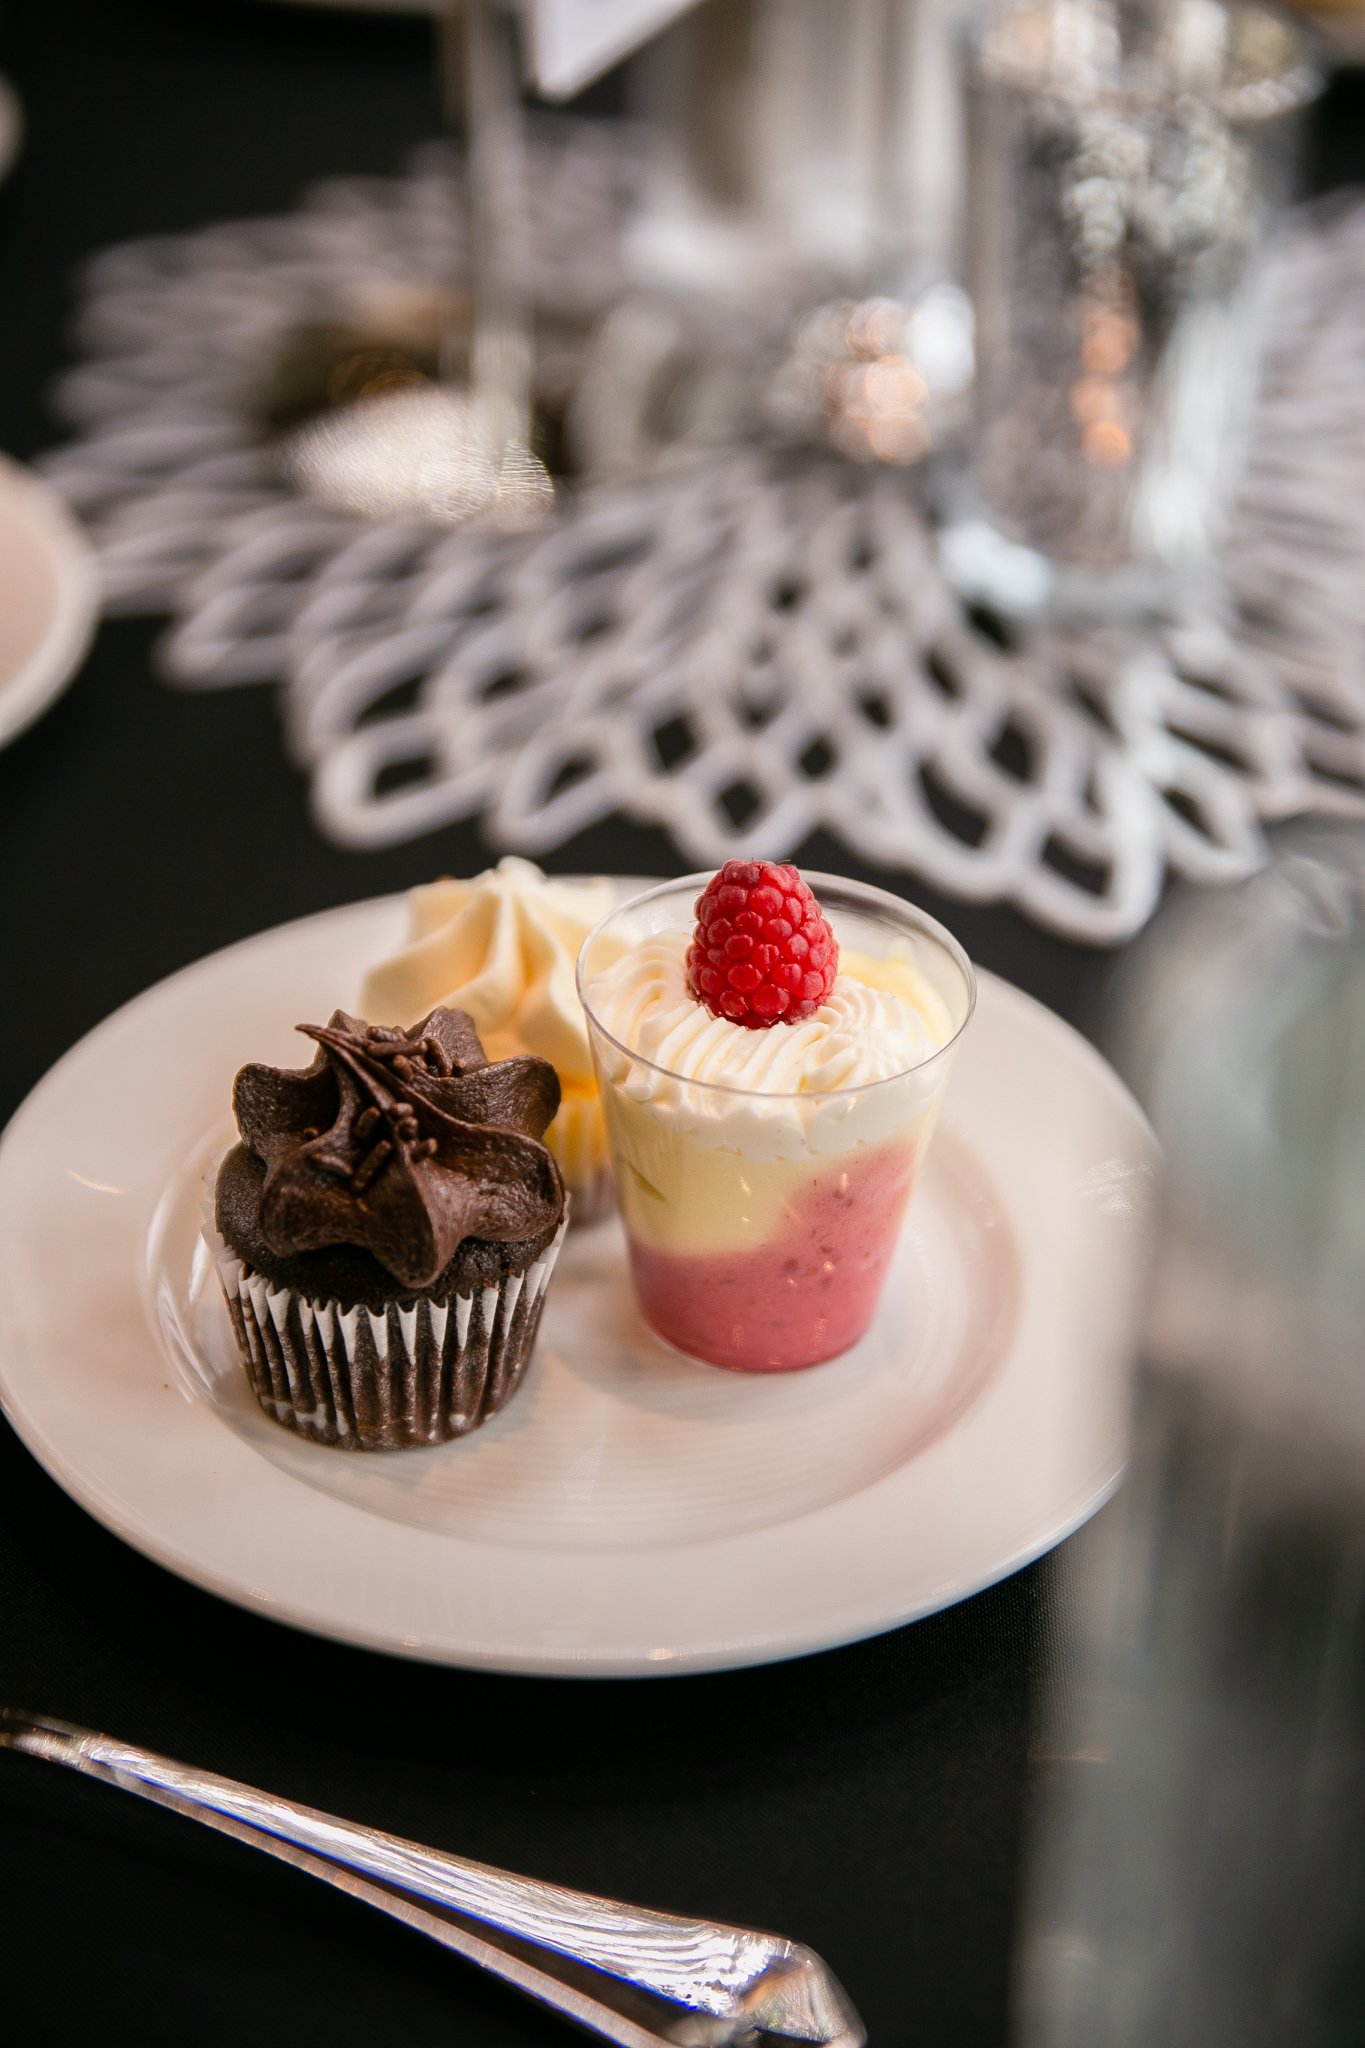  An arrangement of Signature Minature Trio desserts (mini chocolate cakes, mini cheesecake, and seasonal mousse) is plated for an event. A decorative doily is in the center of the table in the background. 